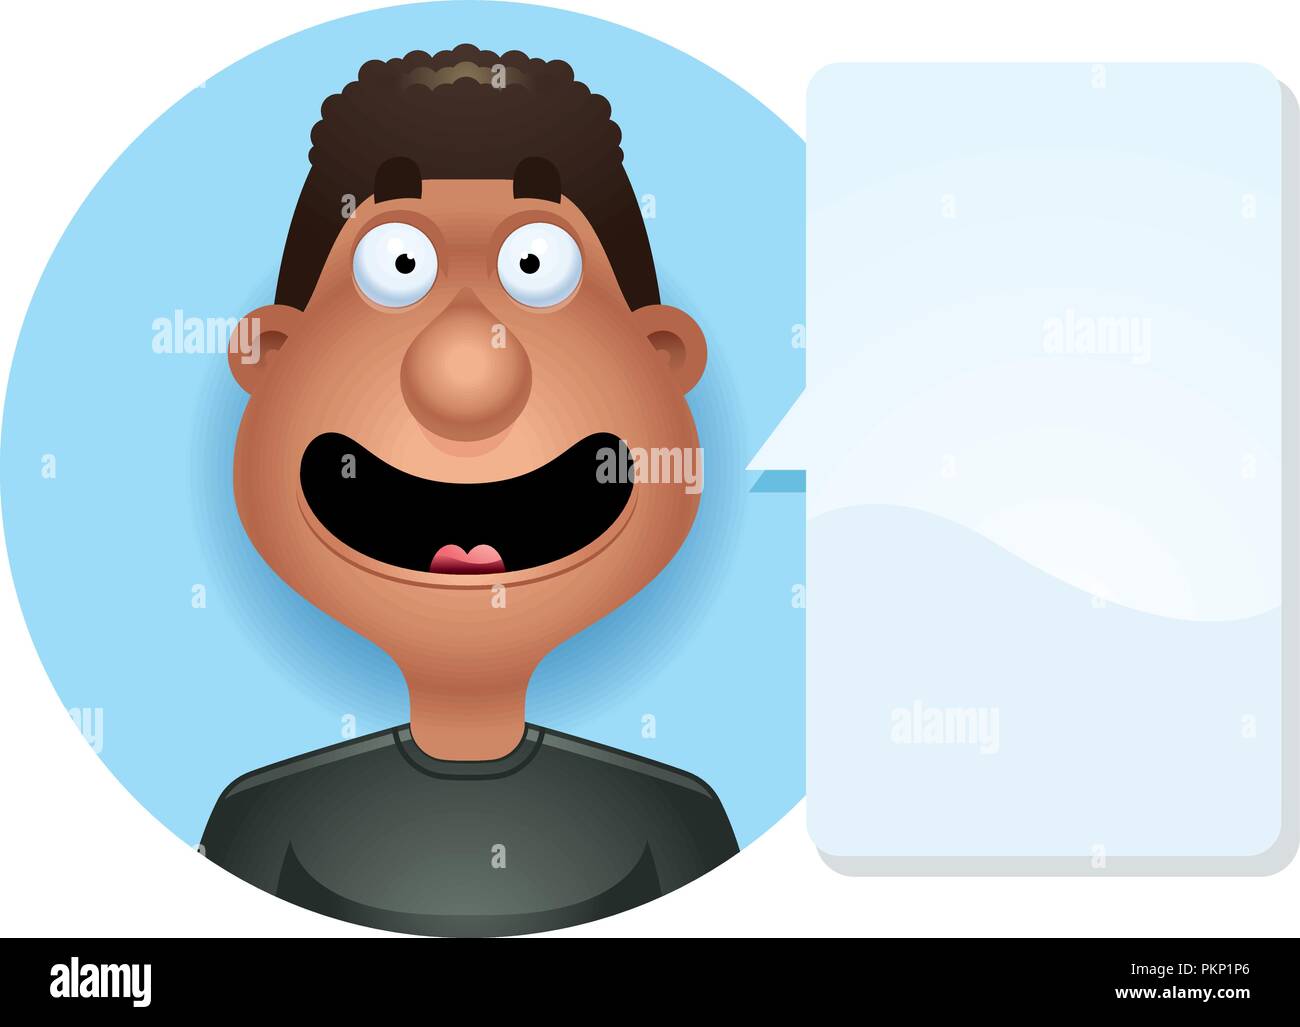 A cartoon illustration of a black man smiling  looking happy. Stock Vector